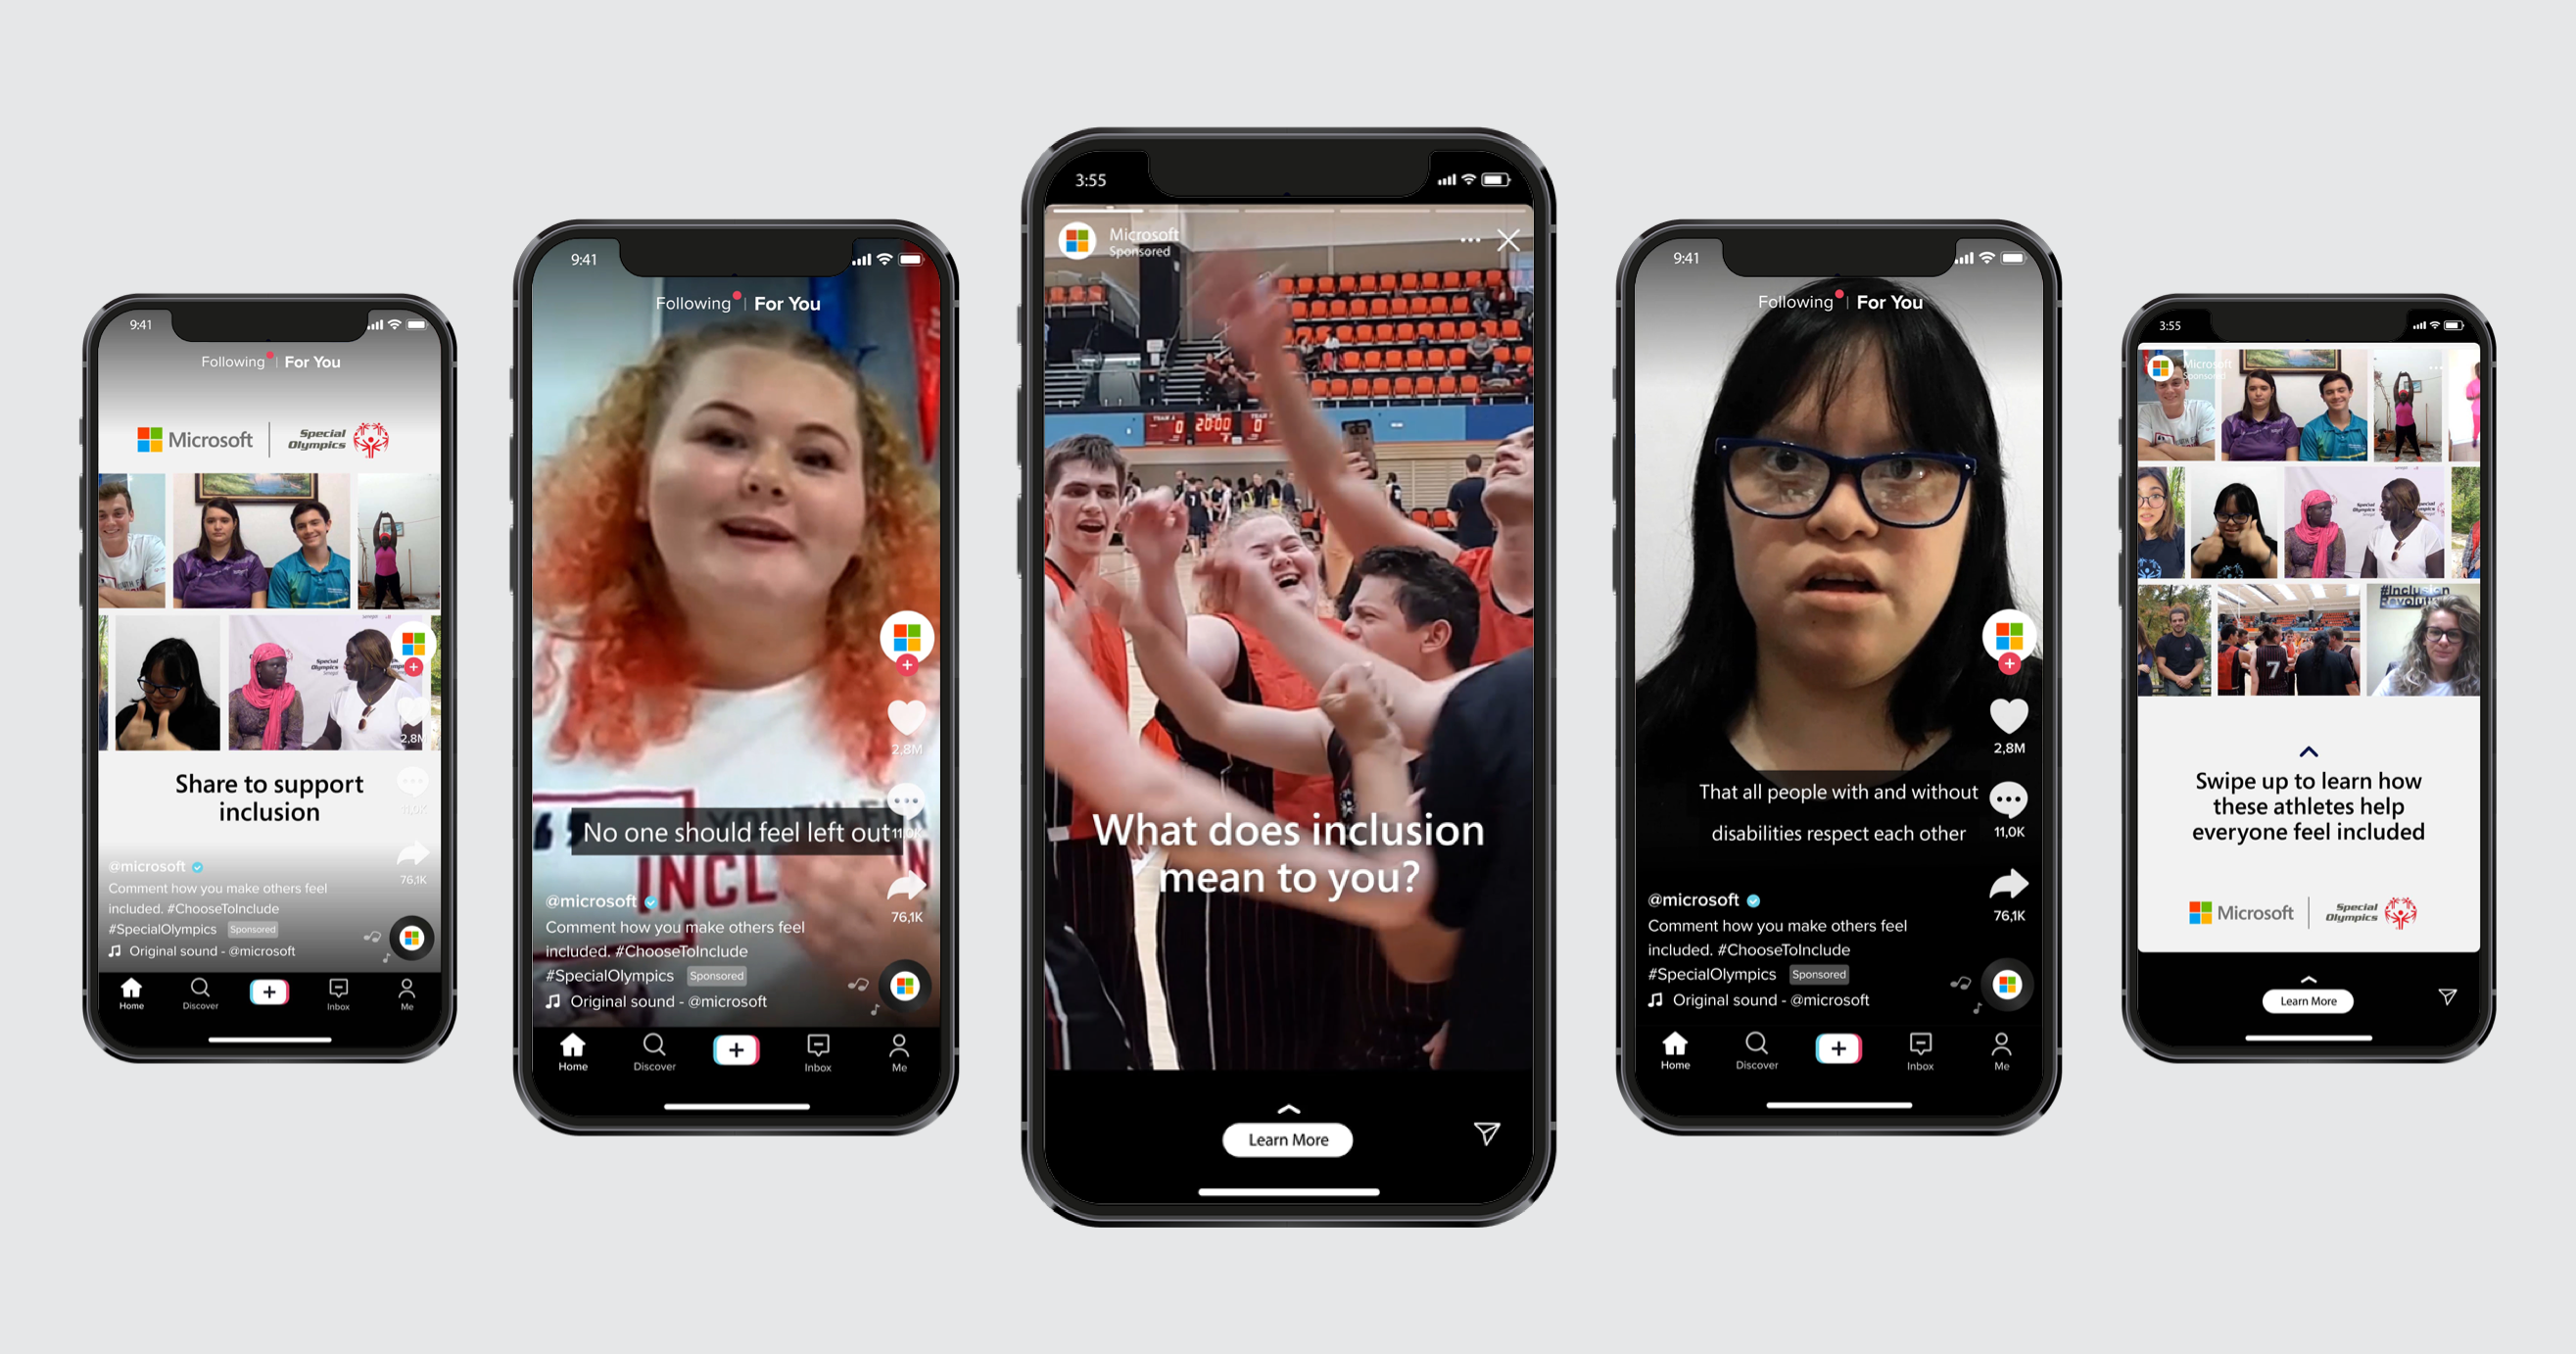 Microsoft Special Olympics Youth Leaders on Social Media